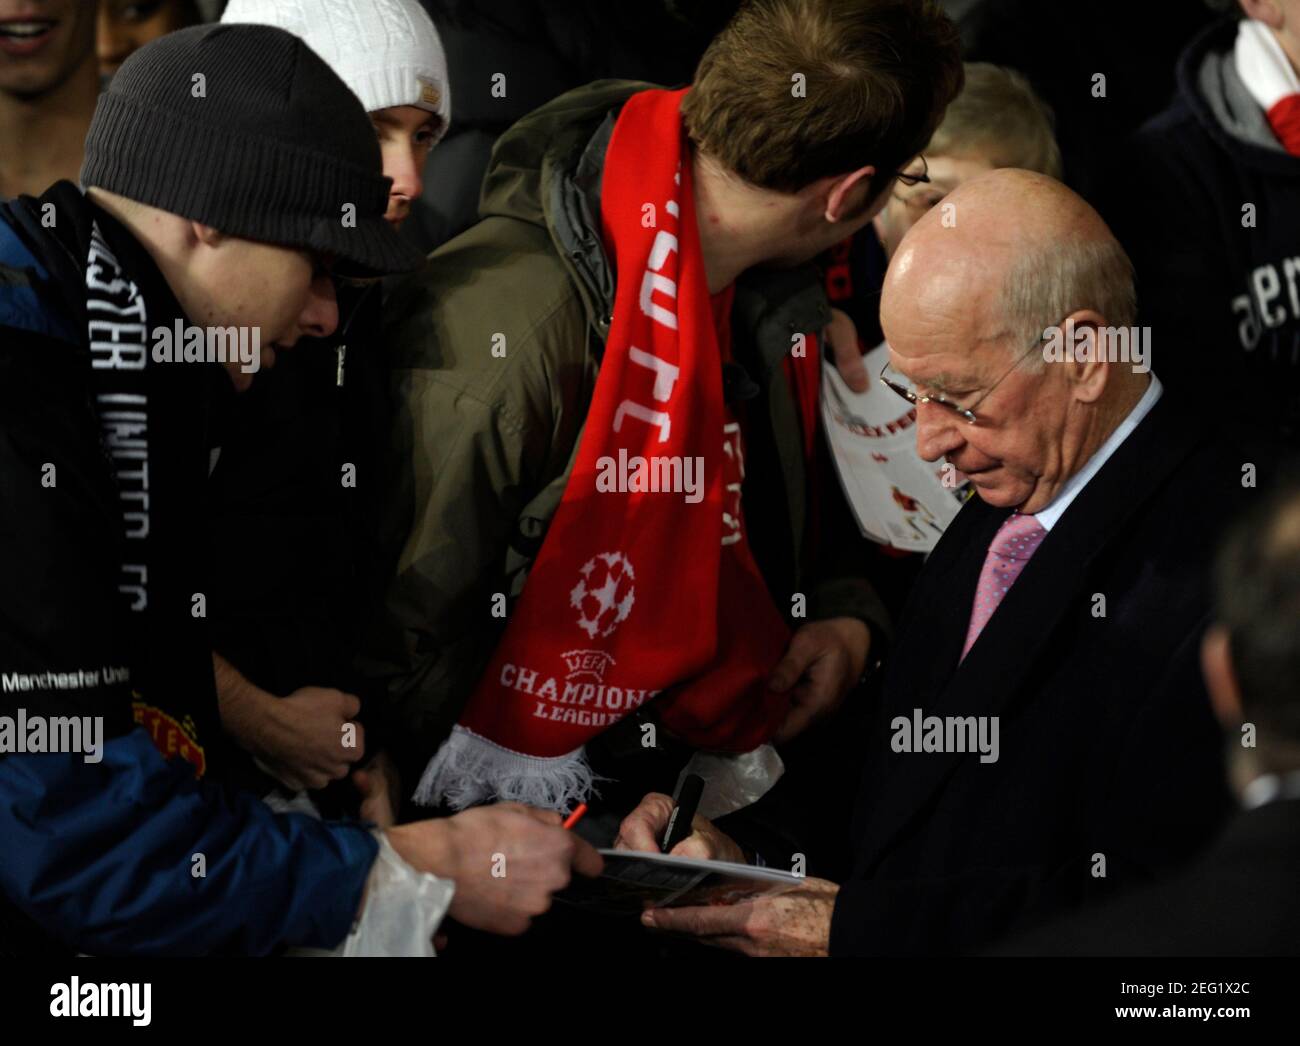 Uddrag reb Mekanisk Football - Manchester United v AaB Aalborg BK - UEFA Champions League Group  Stage - Matchday Six Group E - Old Trafford, Manchester, England - 08/09 -  10/12/08 Sir Bobby Charlton signs